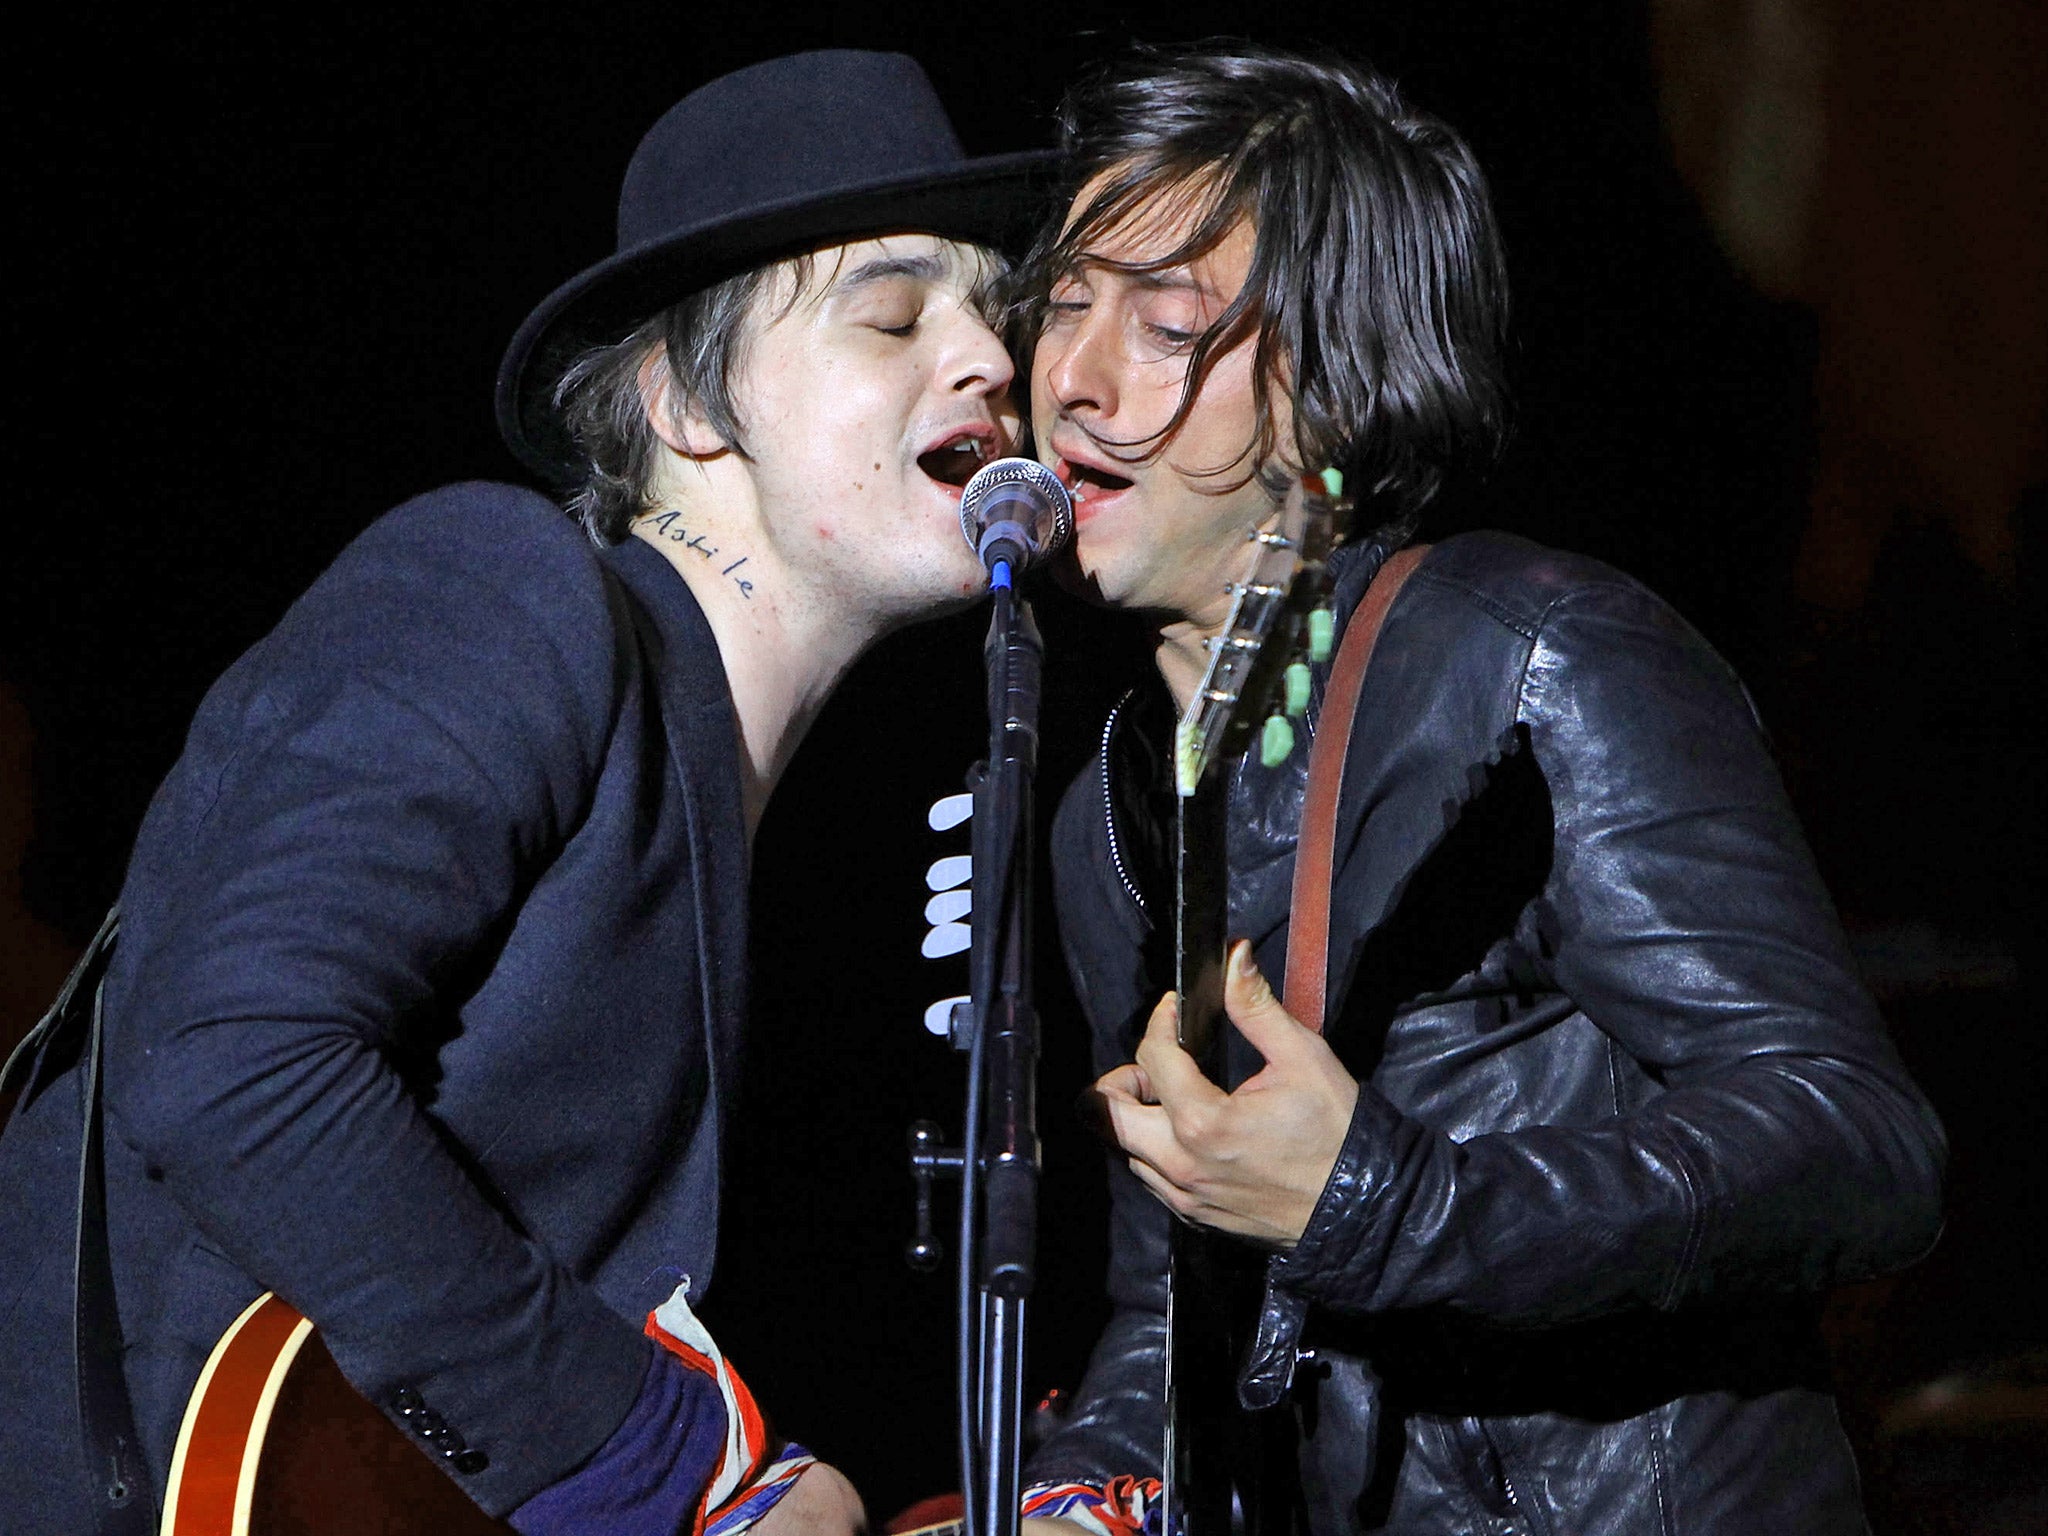 The Libertines are not currently on the Glastonbury line-up but may be making an appearance on Friday evening